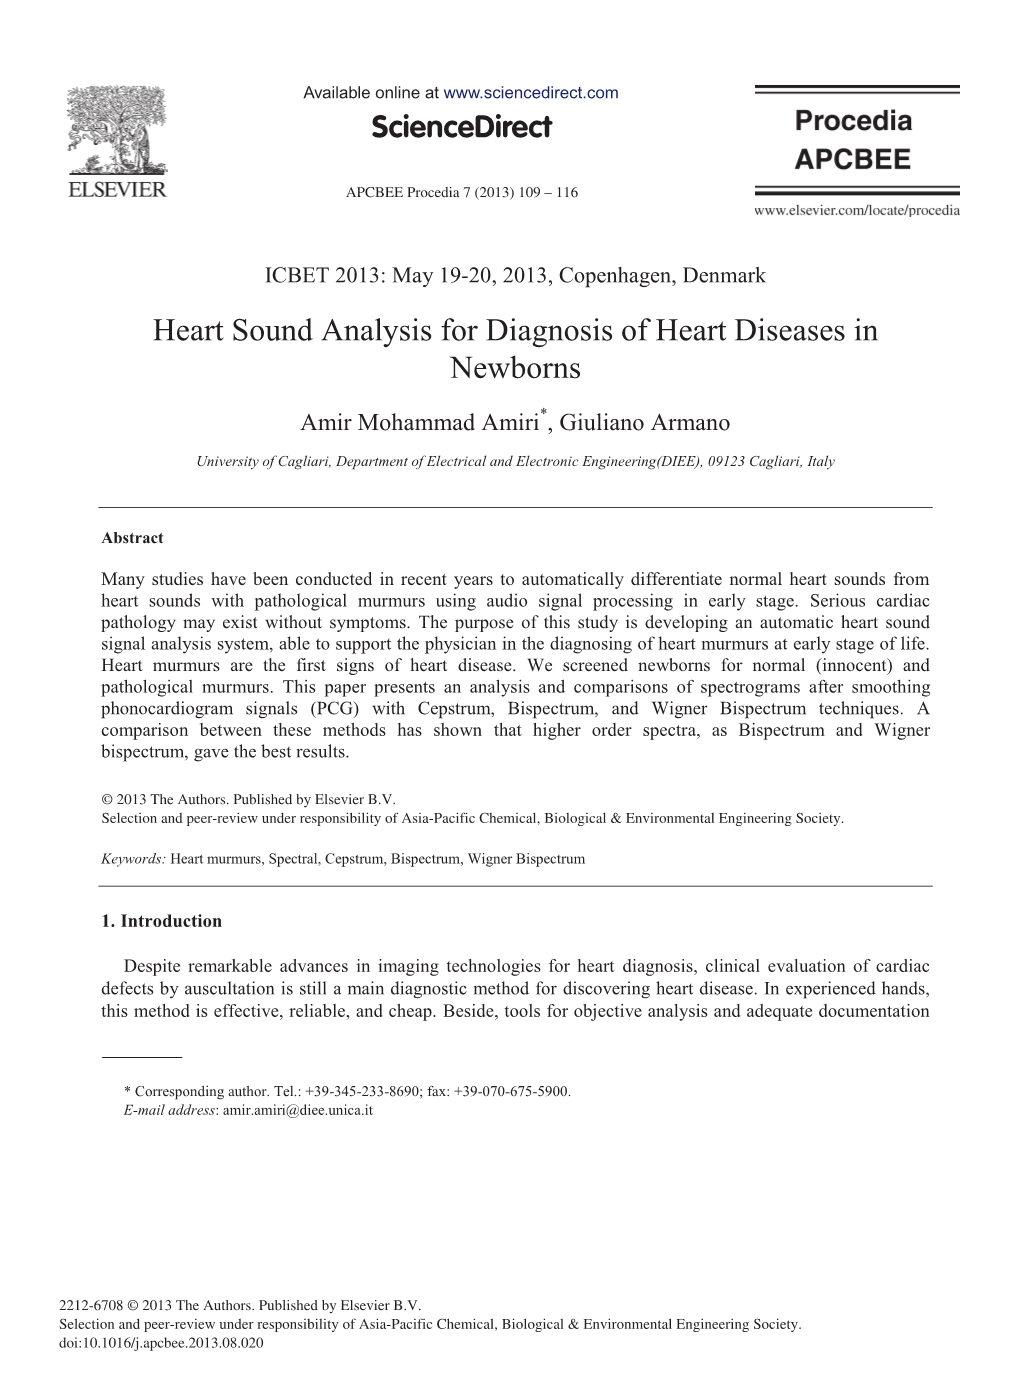 Heart Sound Analysis for Diagnosis of Heart Diseases in Newborns